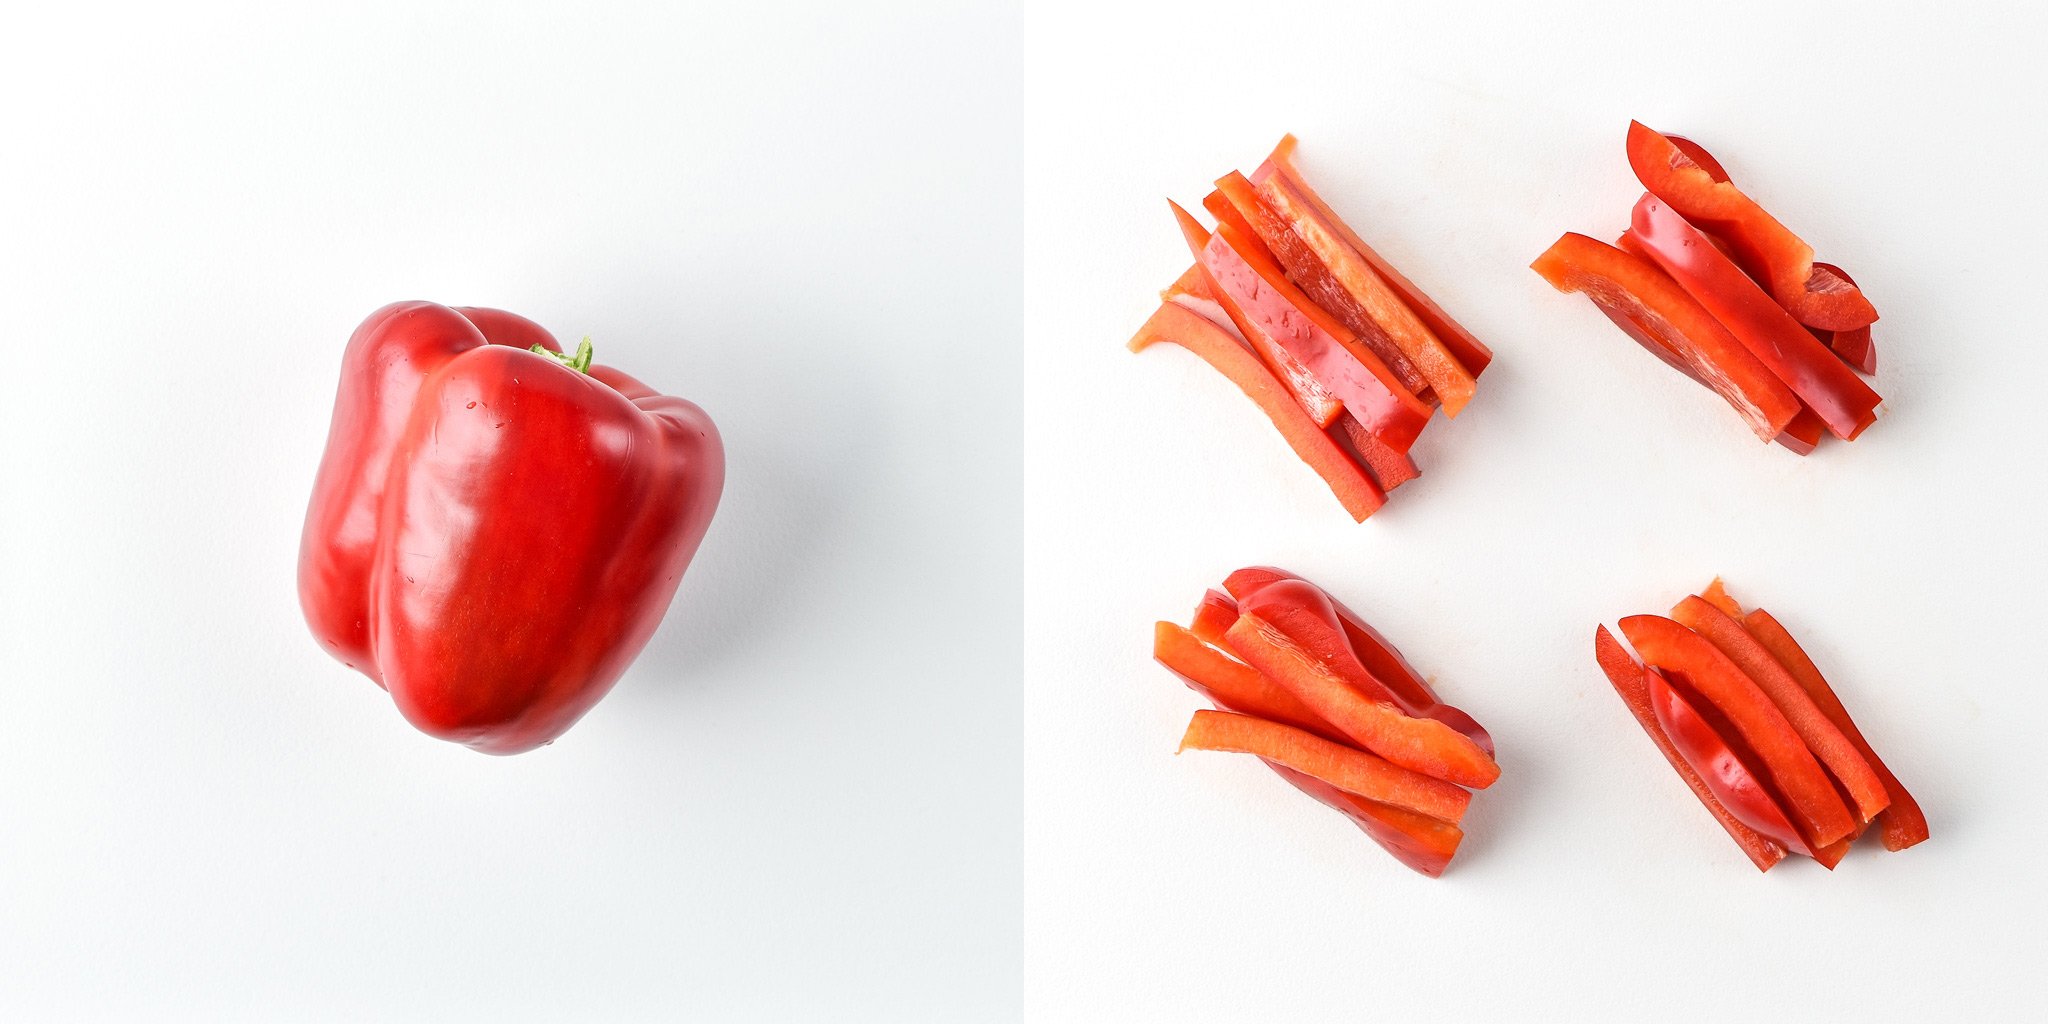 Red bell pepper before and after portioning for the Chicken & Hummus Plate Lunch Meal prep